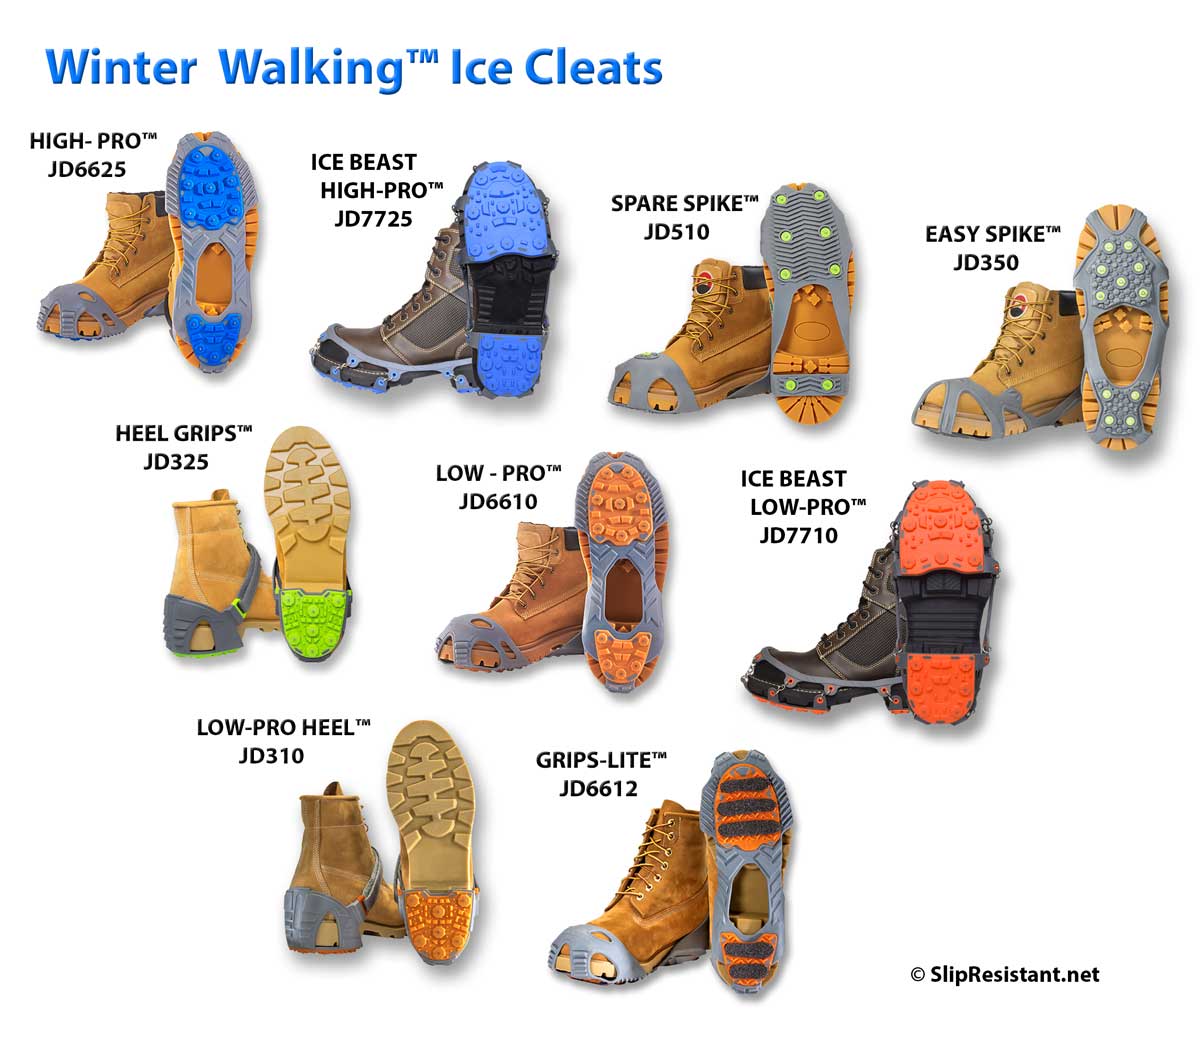 Winter Walking Slip On Ice Cleats for Shoes and Boots